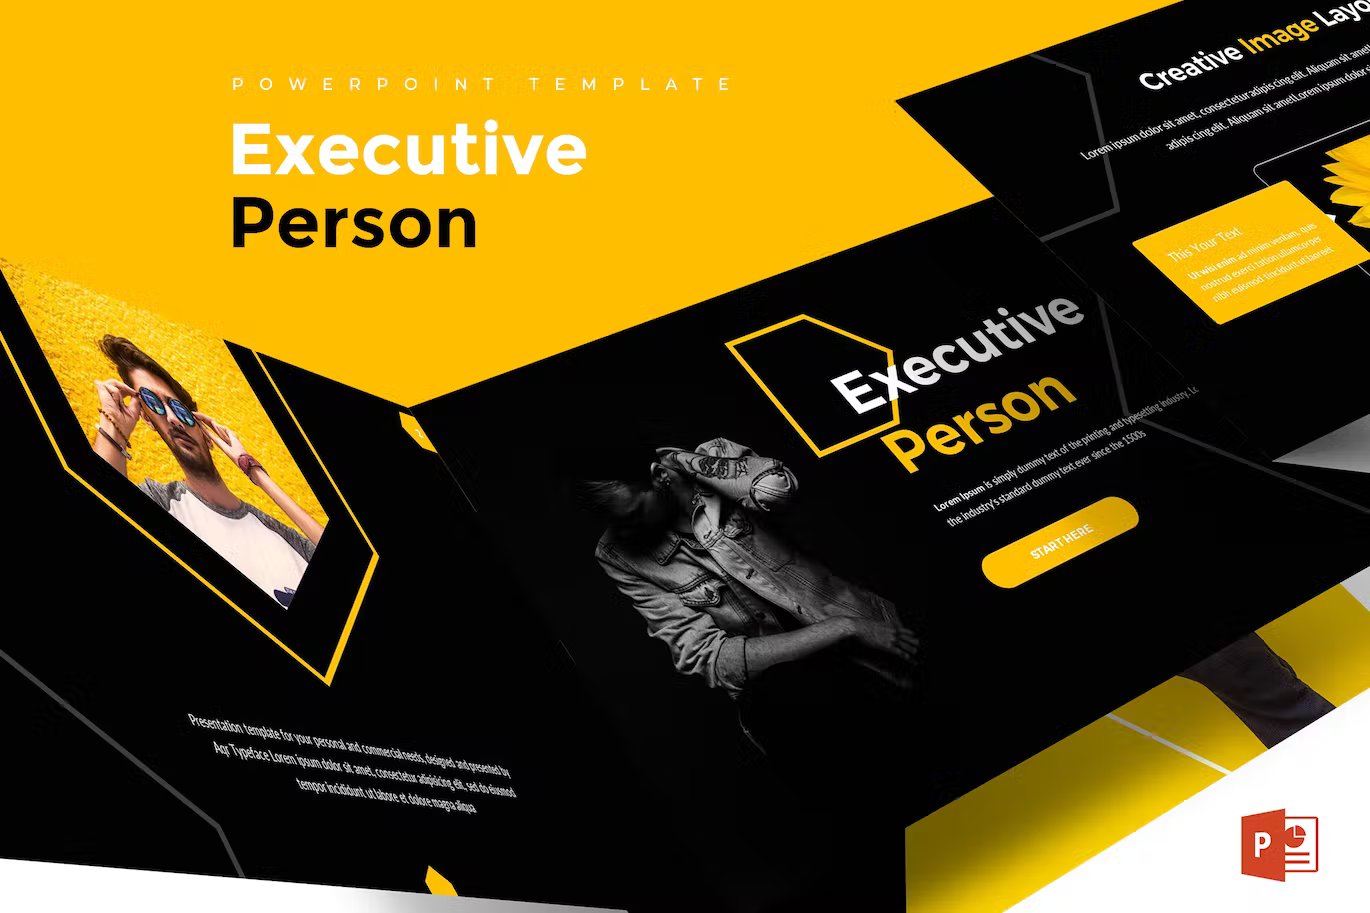 White lettering "Powerpoint Template Executive" and black lettering "Person" and different black, white and yellow presentation templates on a yellow background.